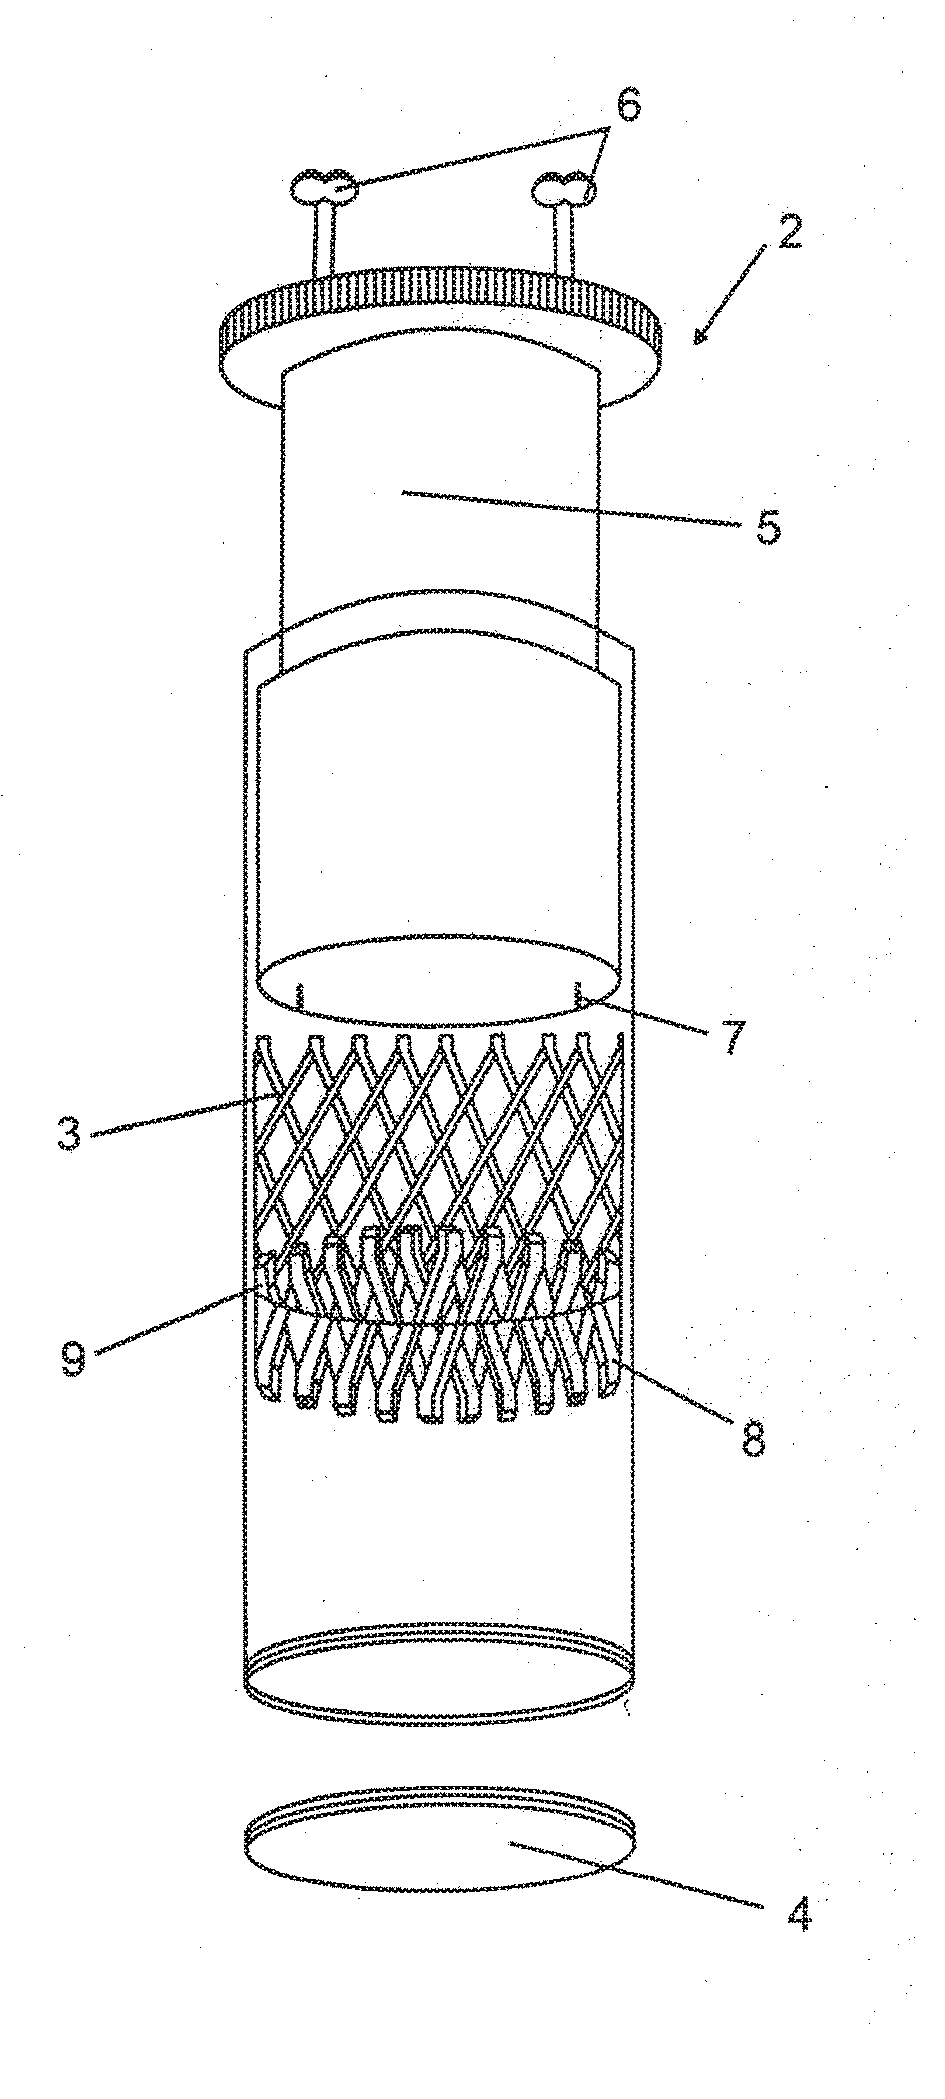 Stent With Mechanical Or Biological Heart Valve For Minimally Invasive Valve Replacement Procedure And Stent Application Device